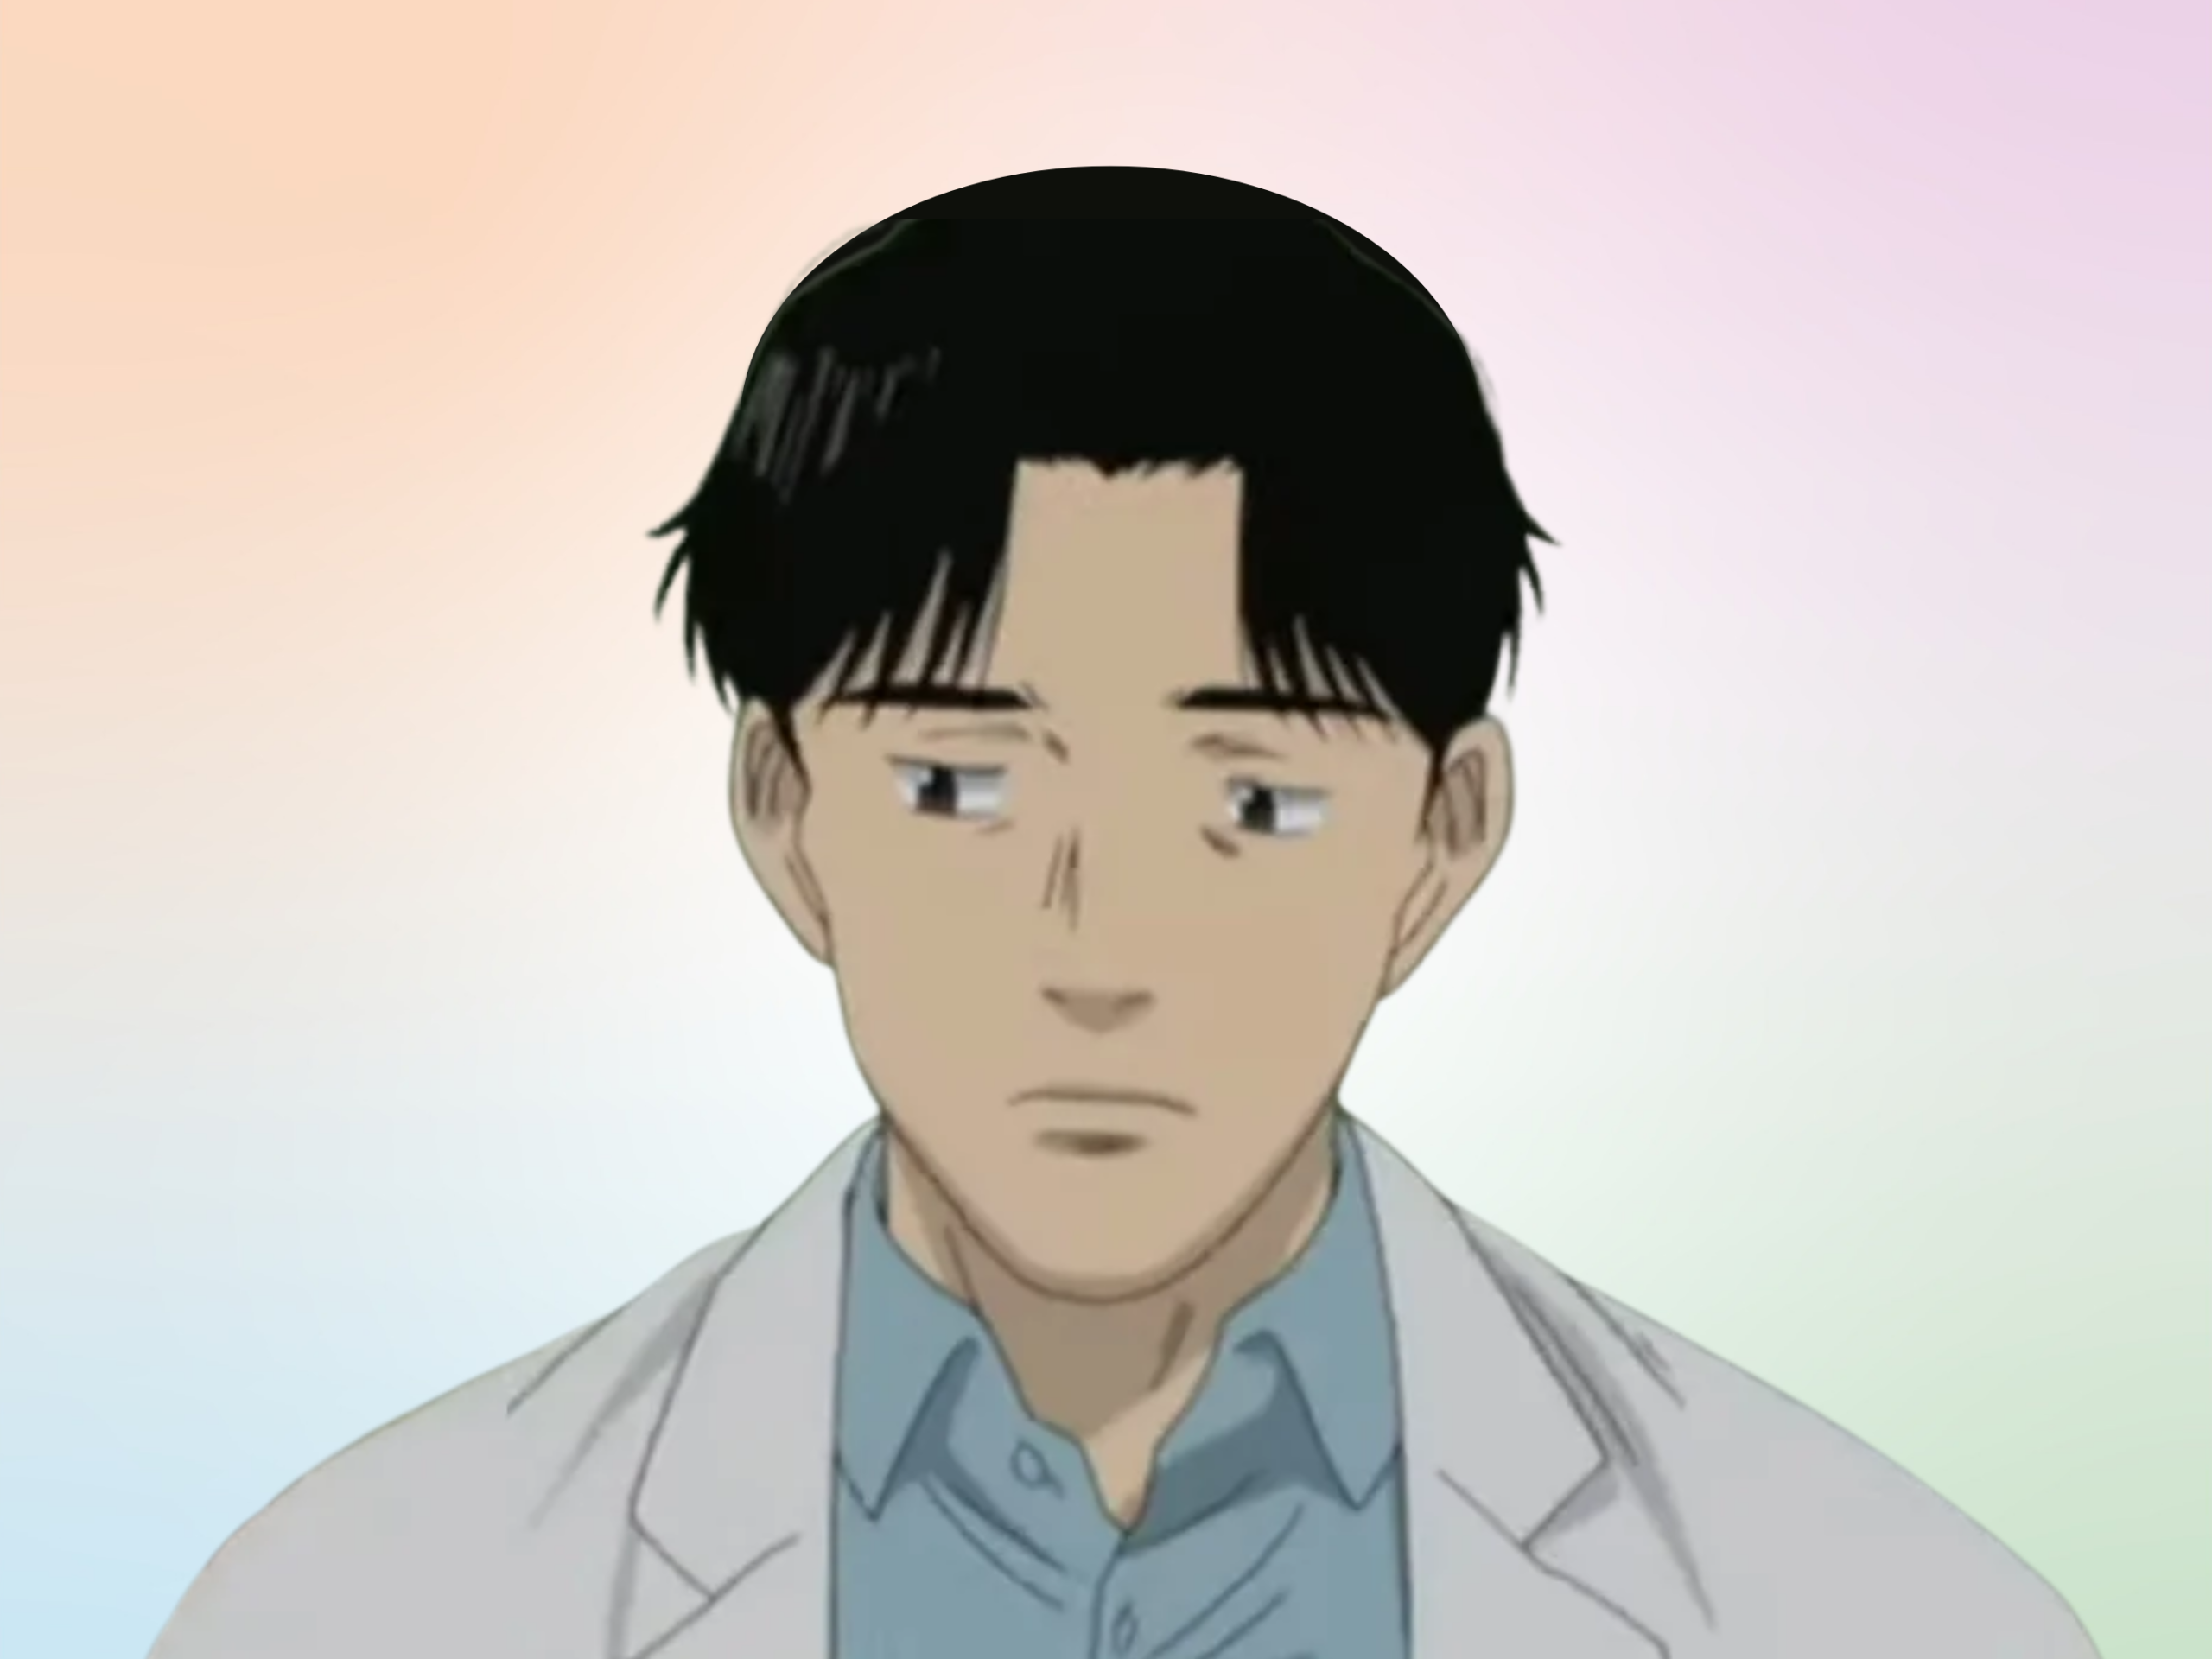 What mbti type is dr tenma?